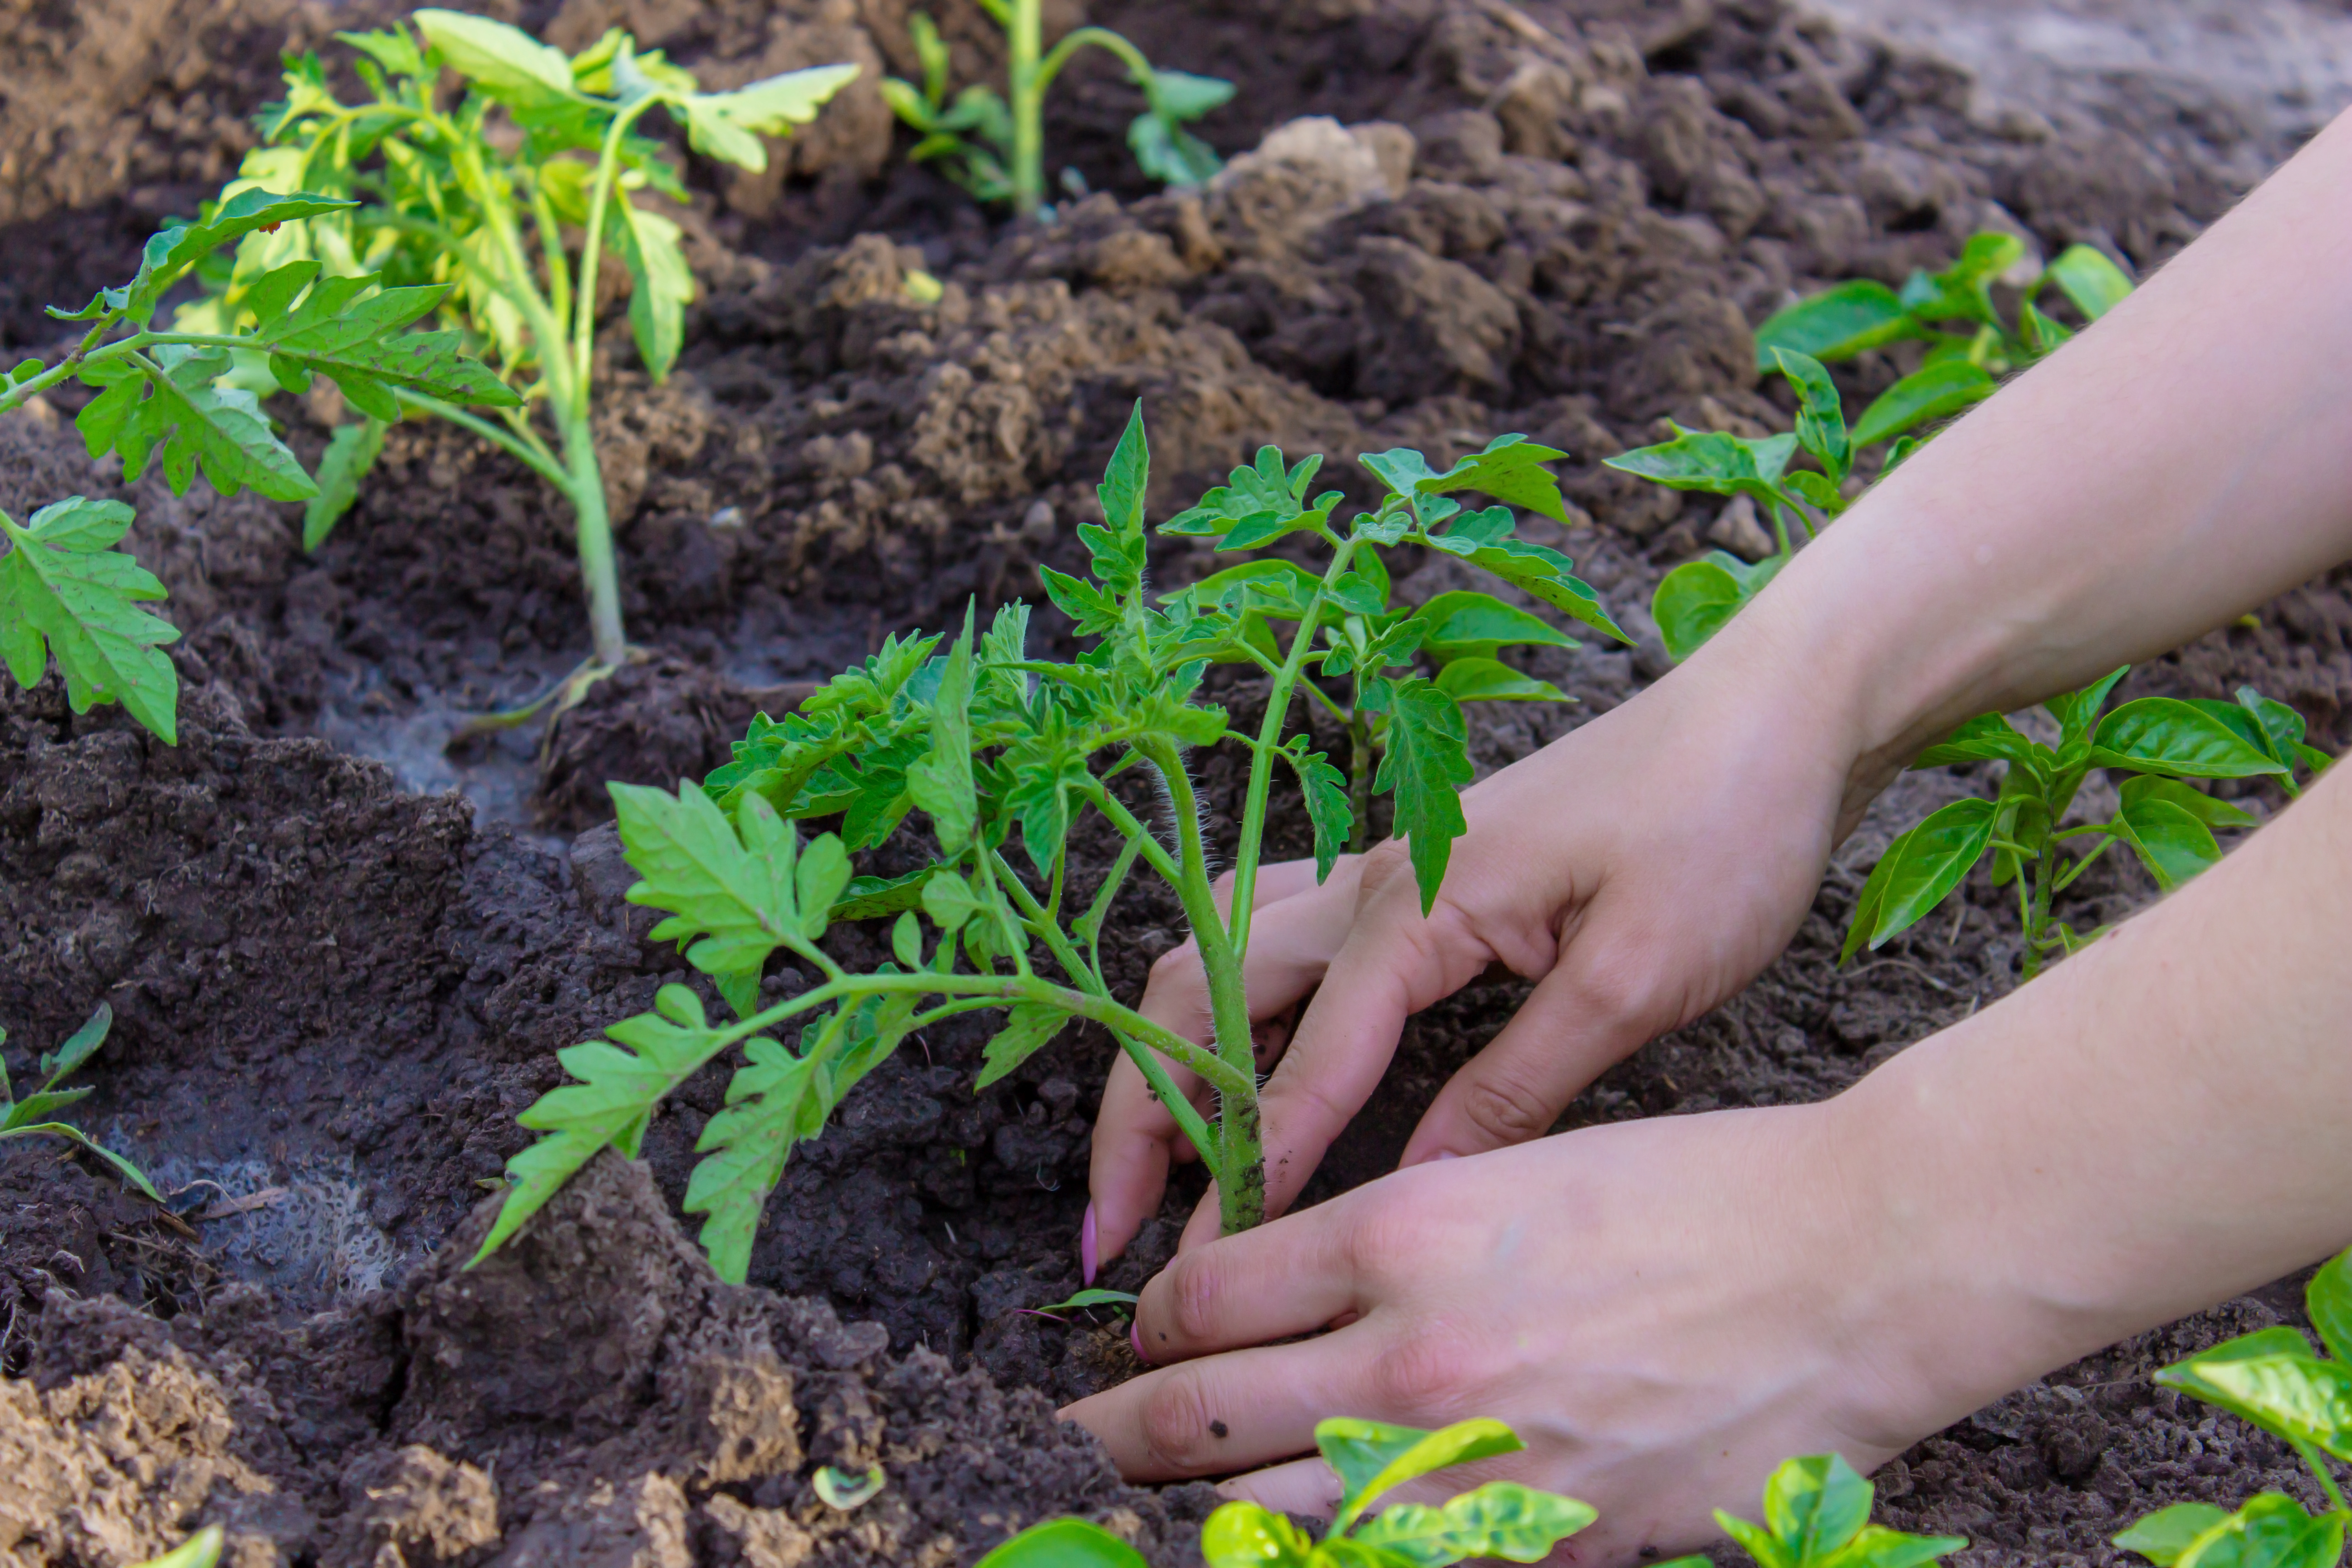 A pair of hands planting tomato plants